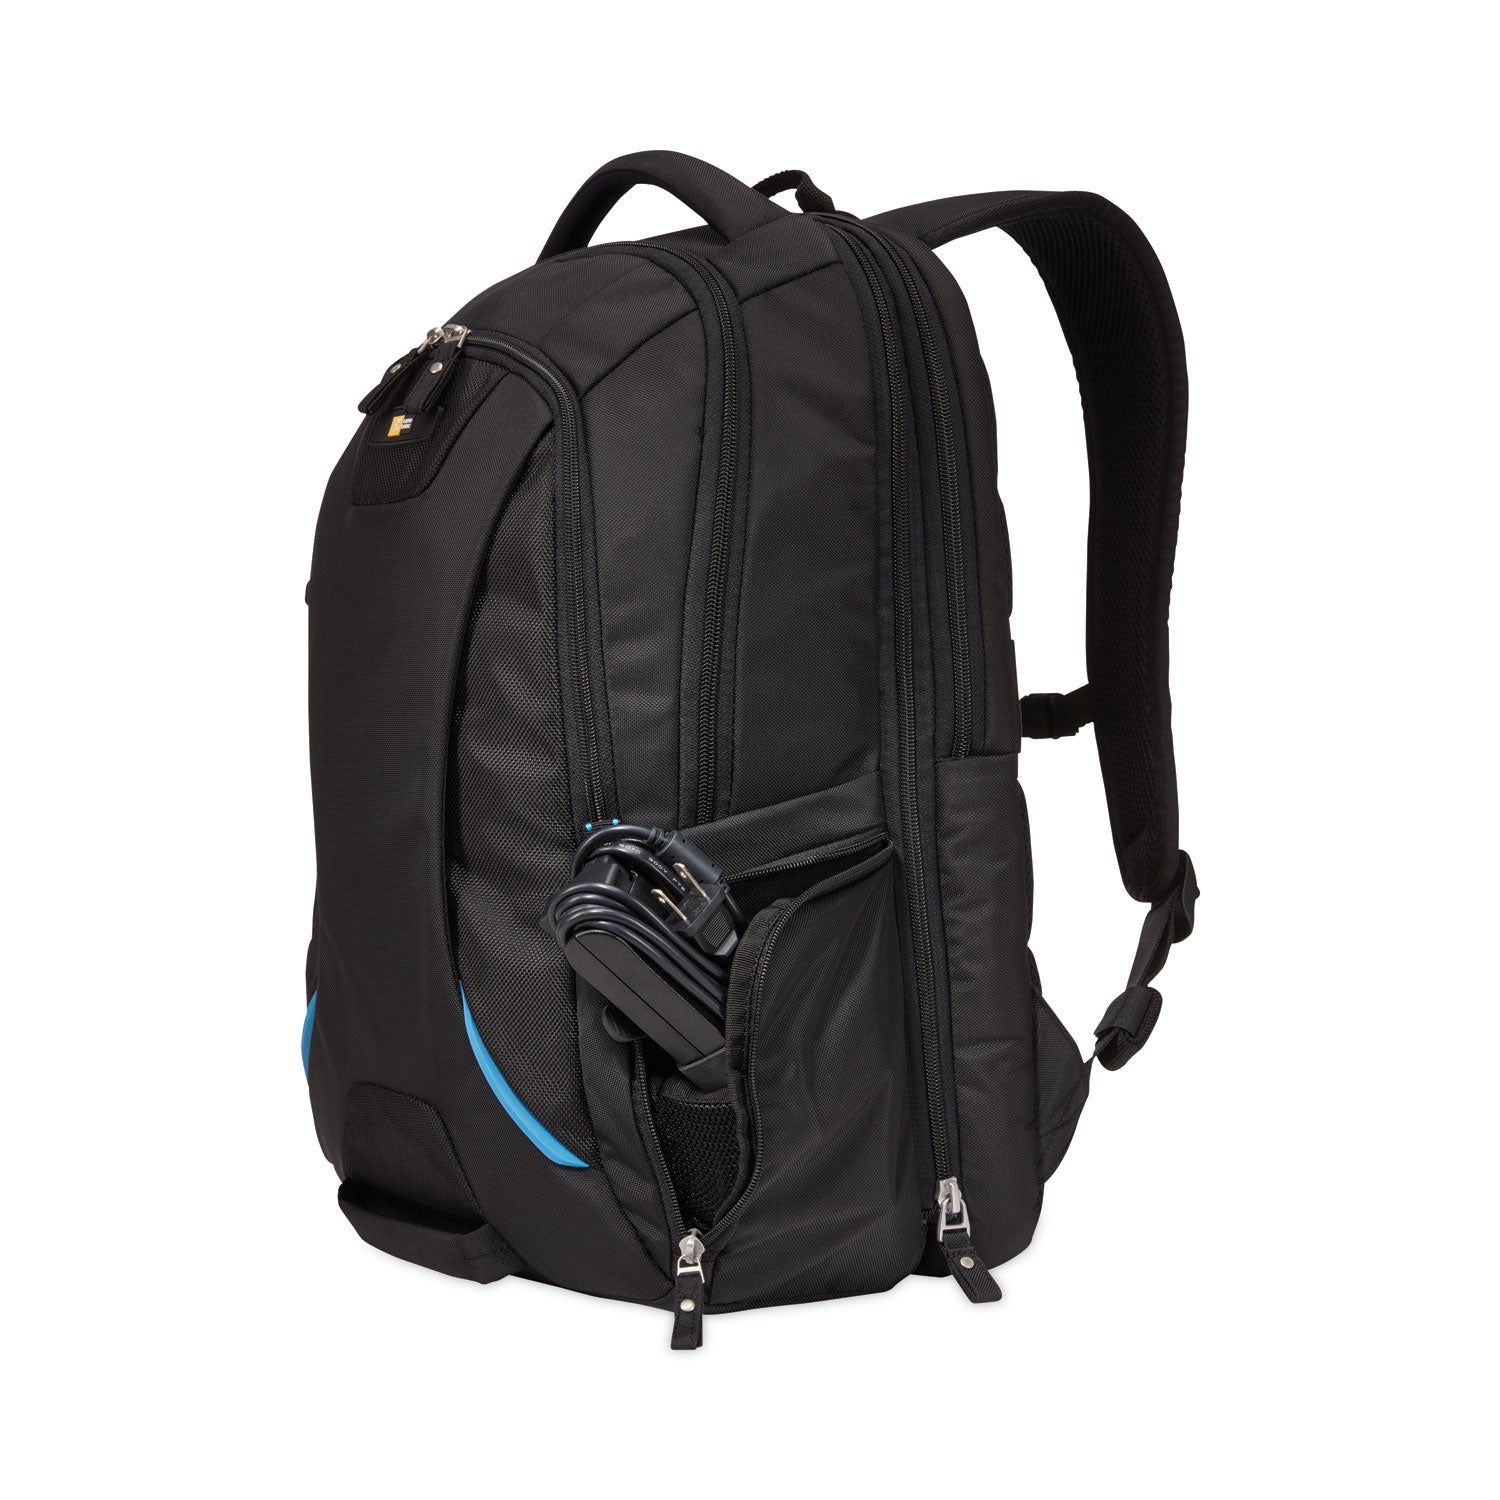 checkpoint-friendly-backpack-fits-devices-up-to-156-polyester-276-x-1339-x-1969-black_clg3203772 - 3